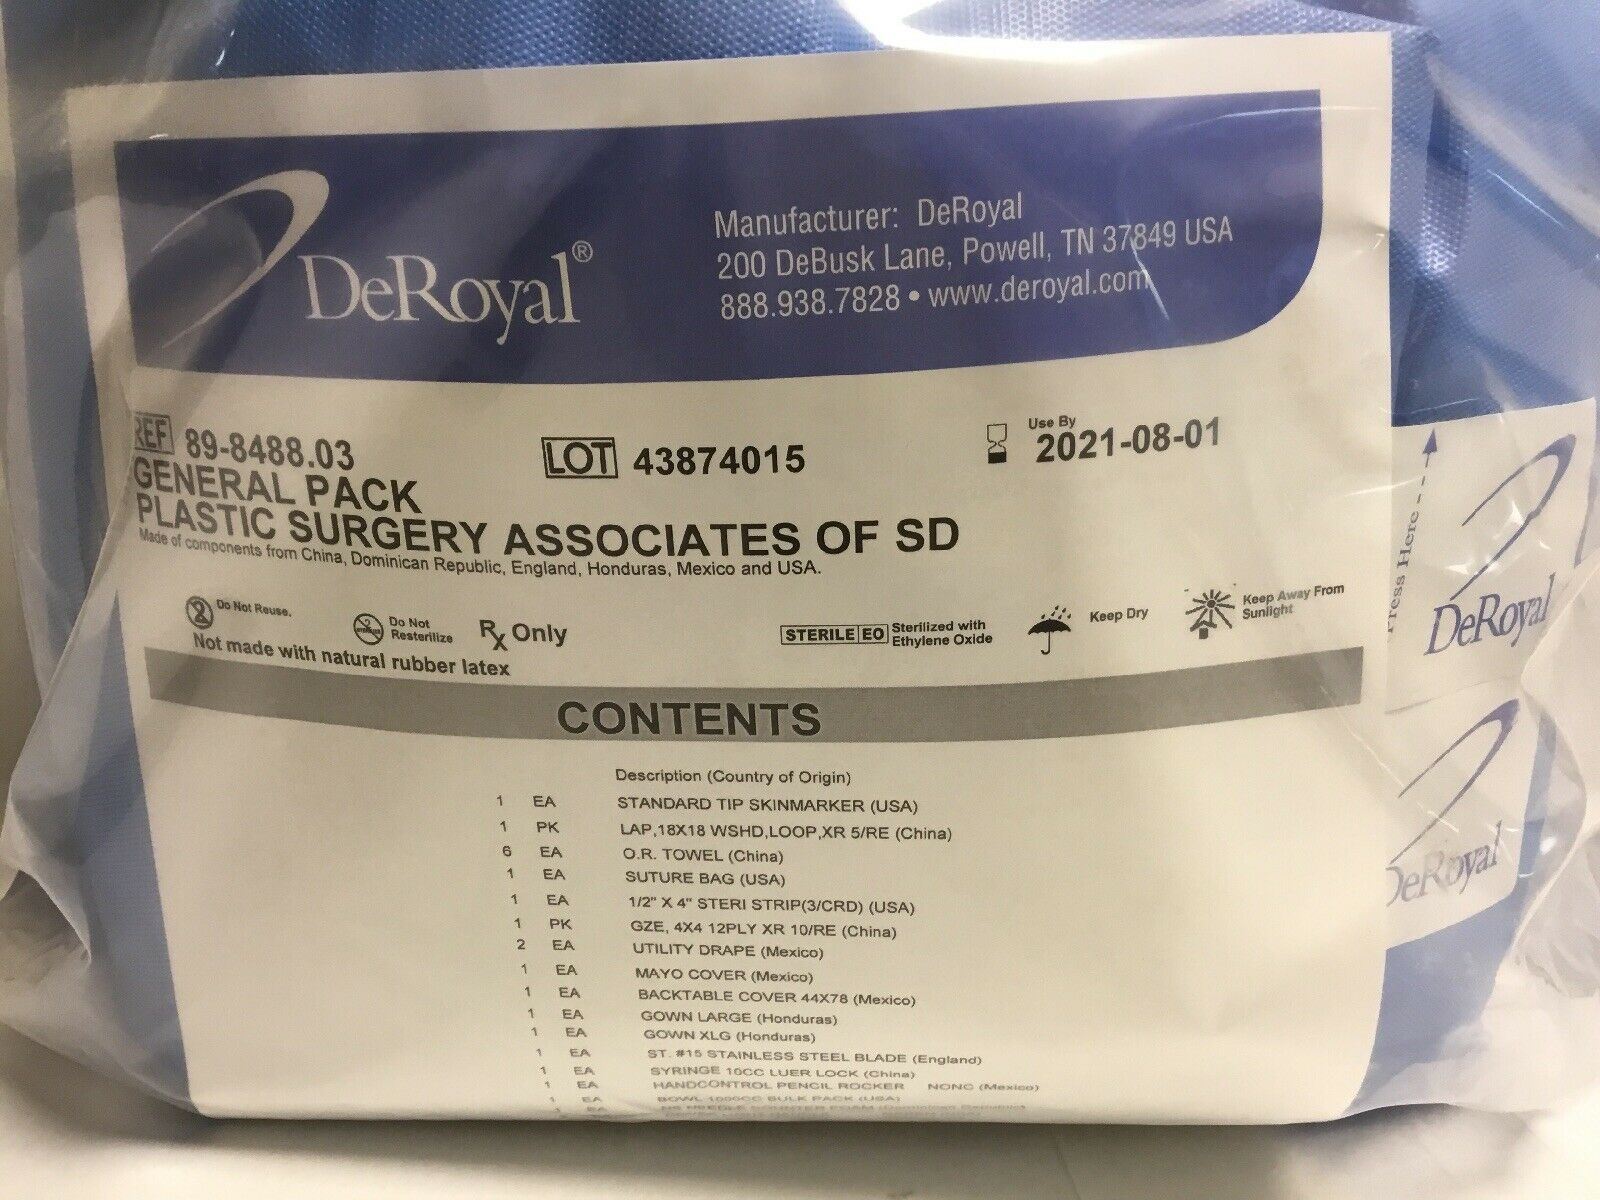 DeRoyal General Pack: Plastic Surgery Associates Of SD (51KMD) DIAGNOSTIC ULTRASOUND MACHINES FOR SALE